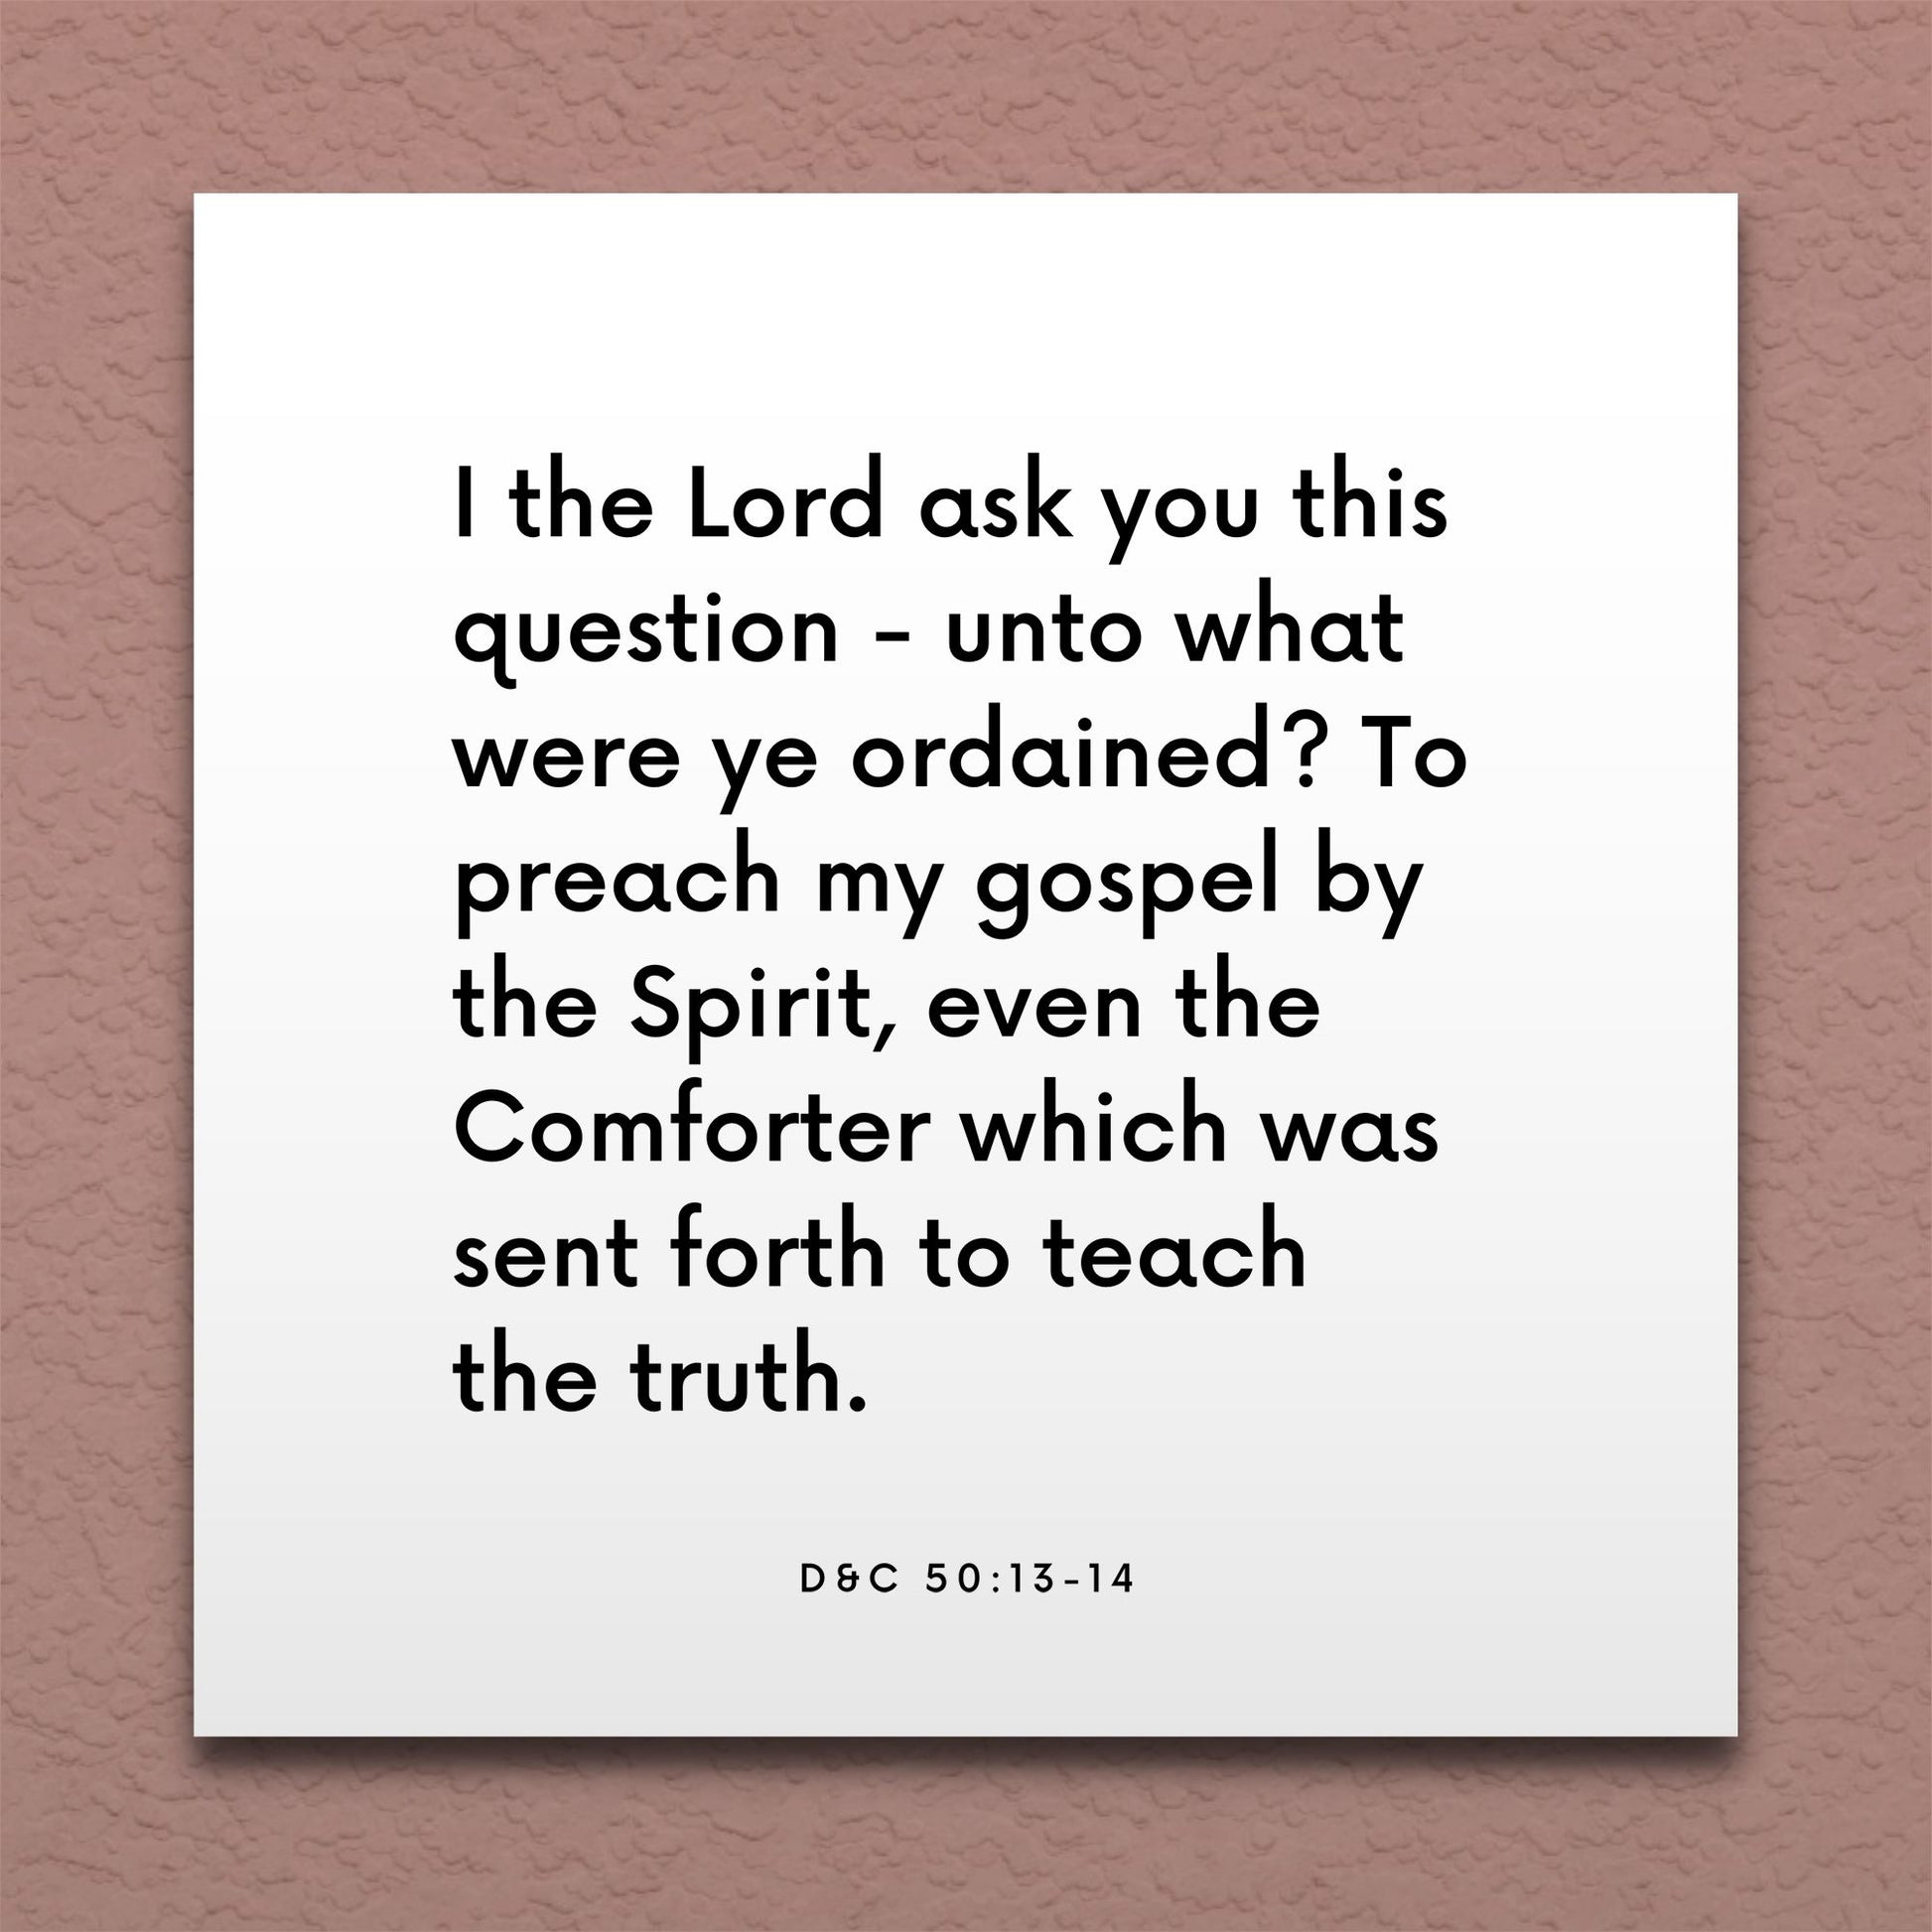 Wall-mounted scripture tile for D&C 50:13-14 - "I the Lord ask you this question - unto what were ye ordained?"